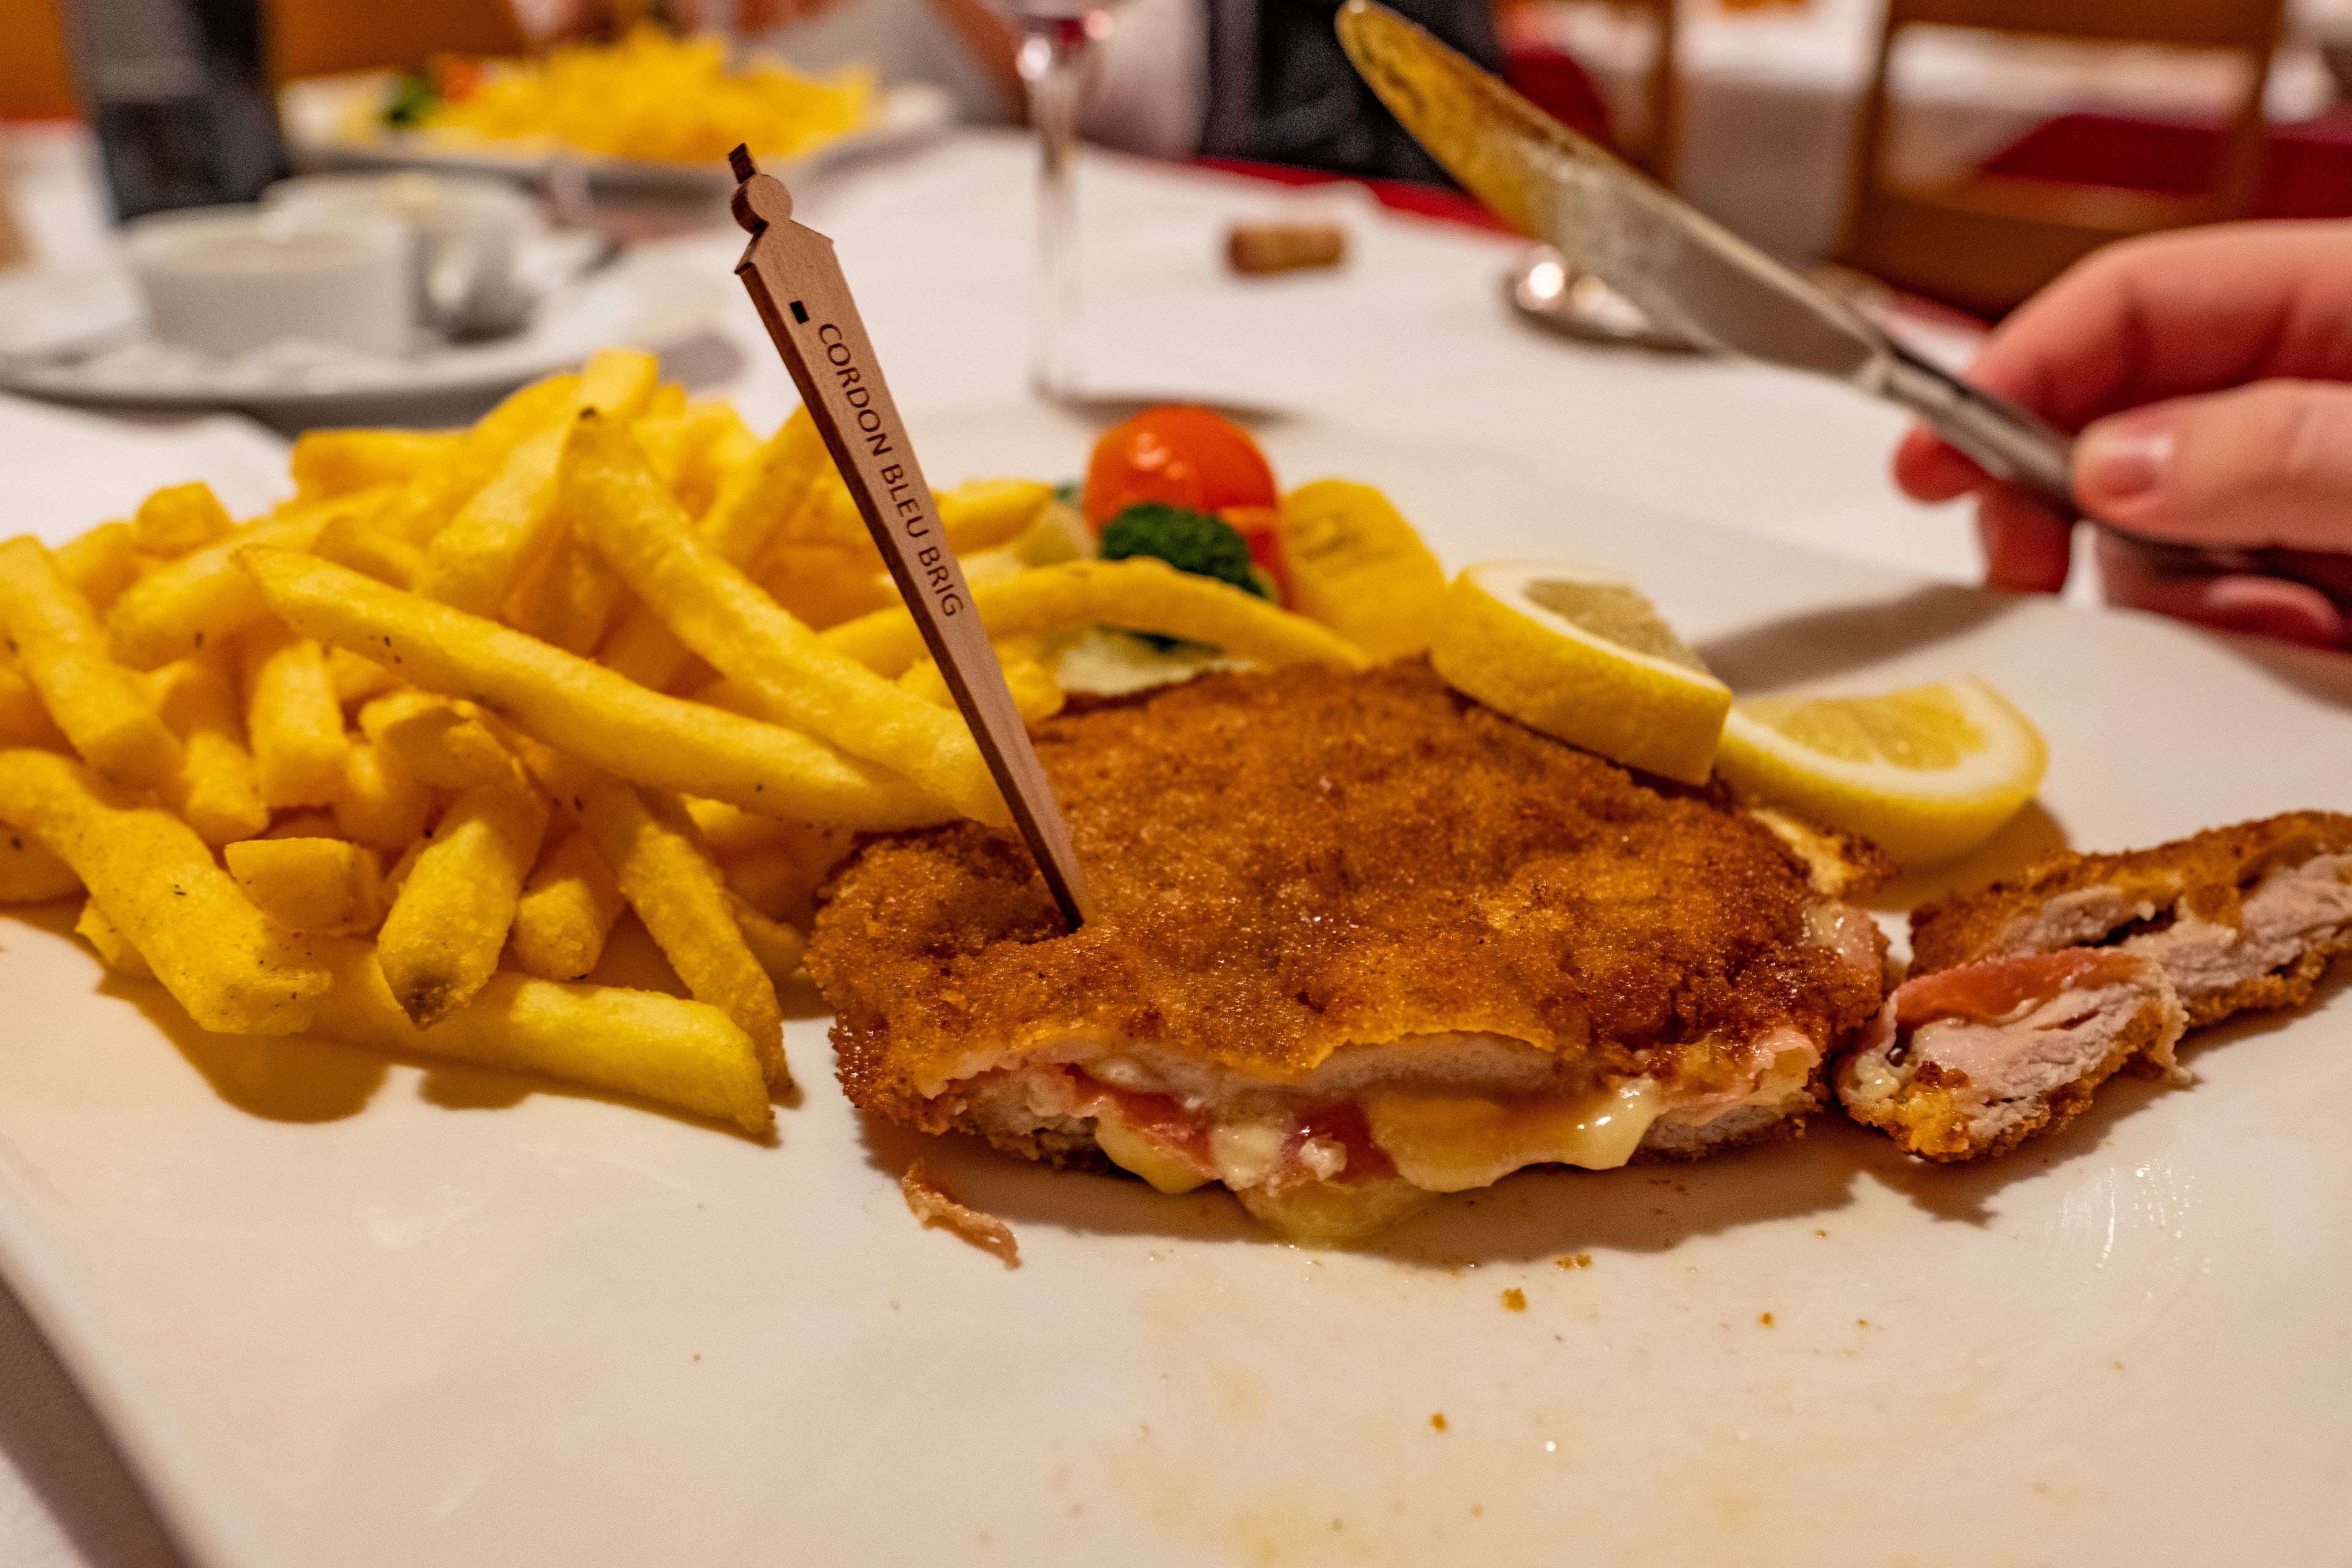 According to legend, the world-famous breaded schnitzel filled with cheese and ham was invented in a Brig restaurant. Valais cuisine, Brig, Valais, Switzerland